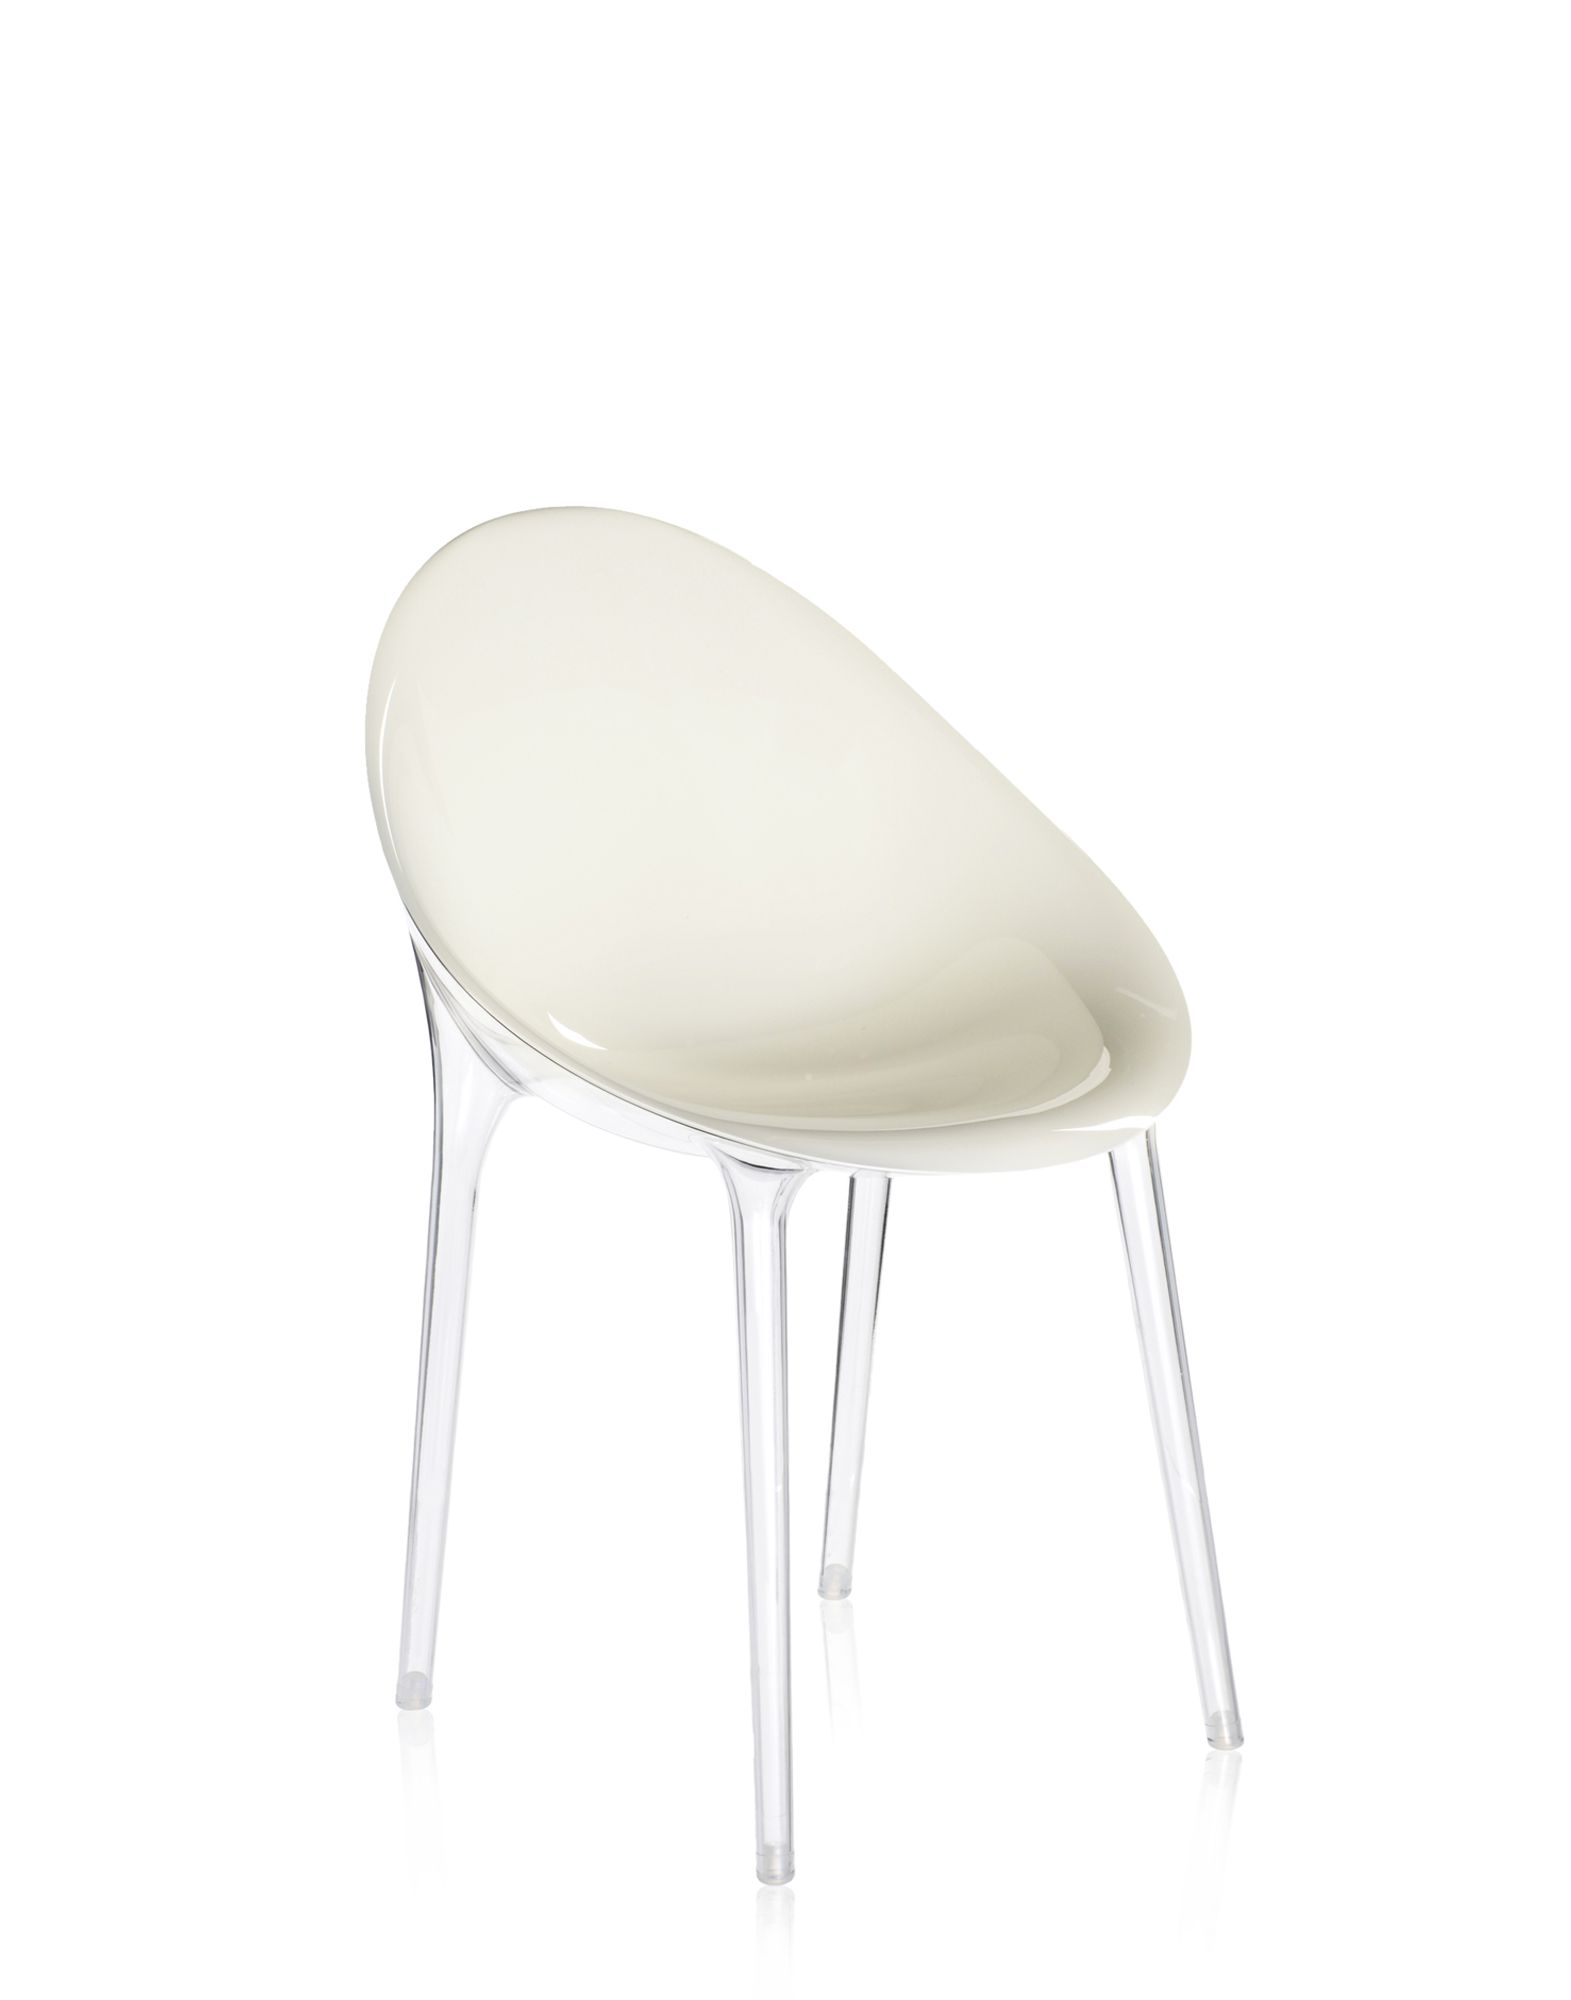 KARTELL MR IMPOSSIBLE BIANCO LUCIDO